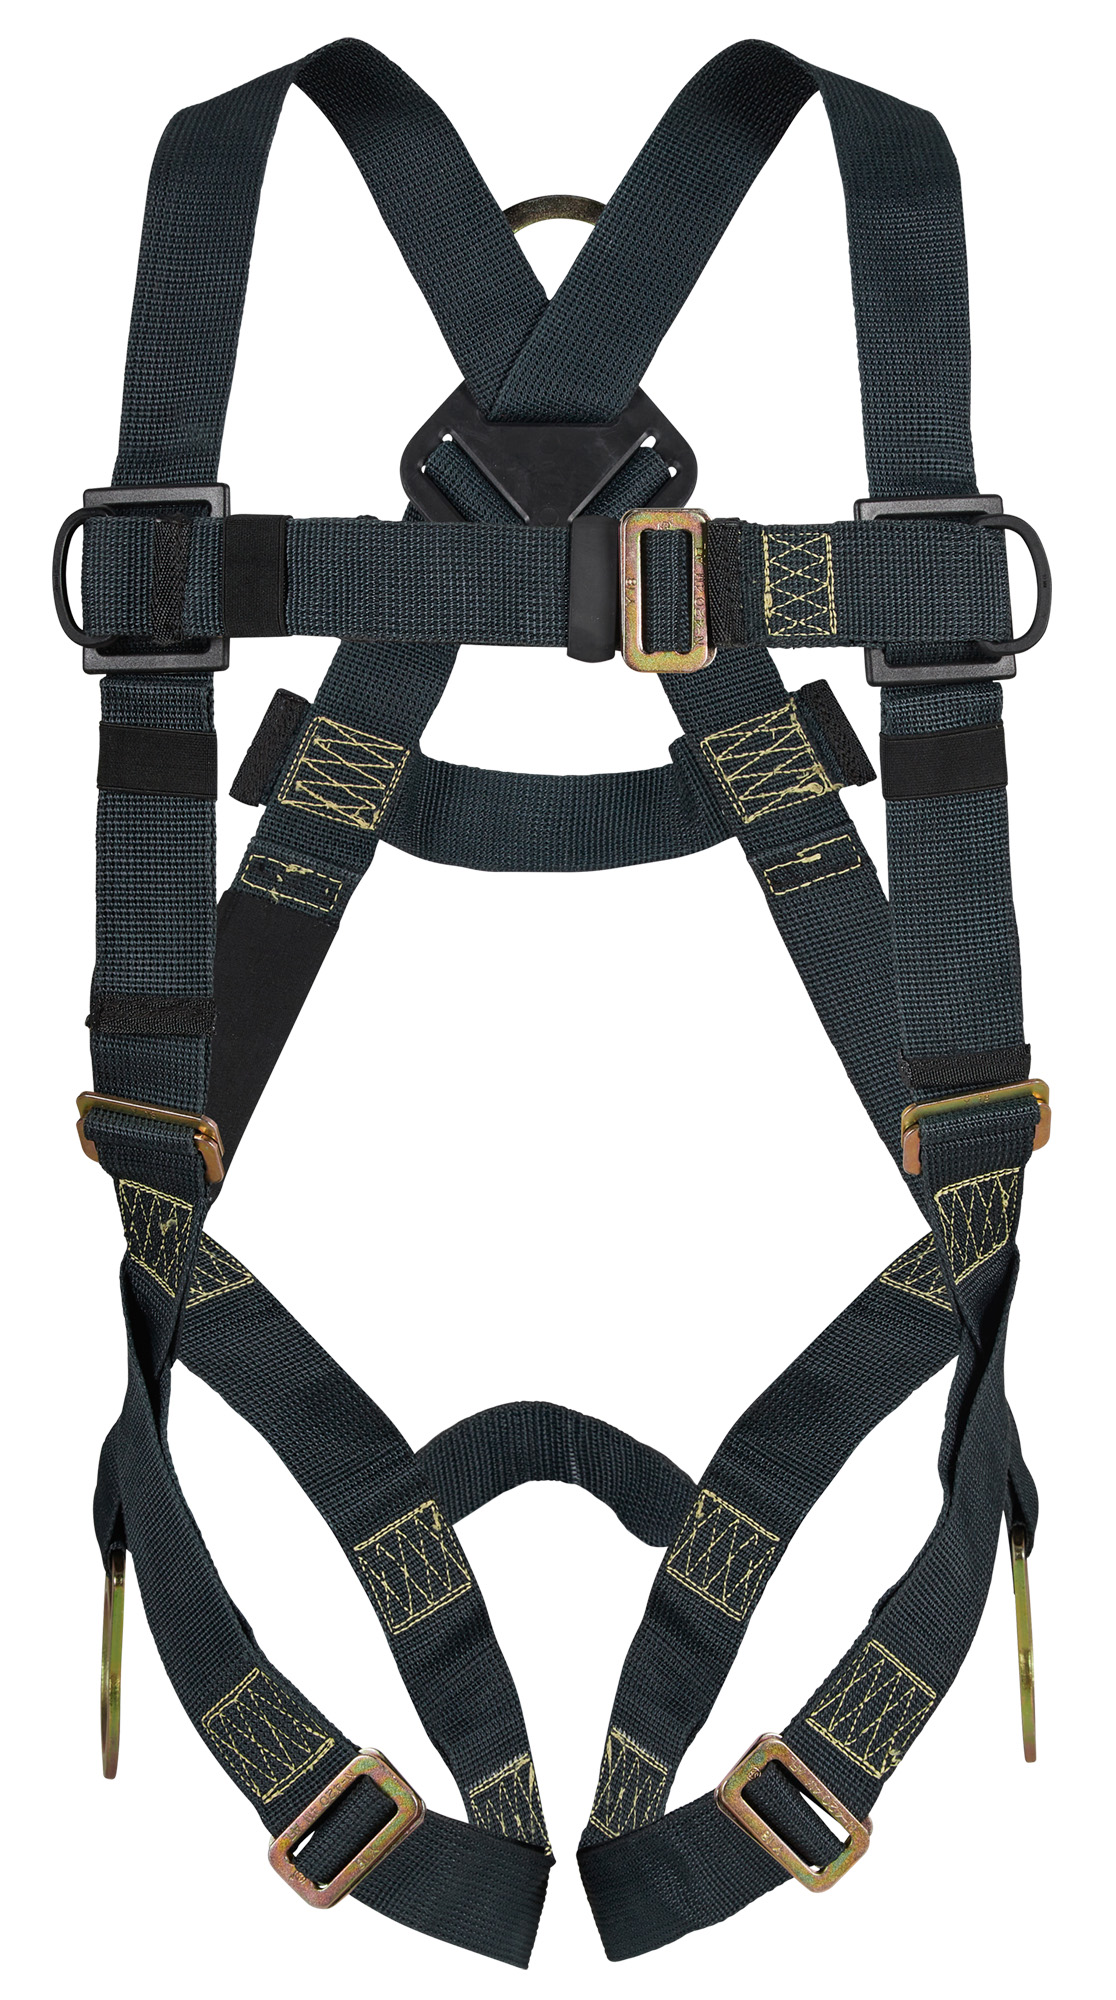 /PIM/NA_Products/NA_Photos/Height_Safety/Harnesses/Tracforce/Product_Photos/P_HSP_Tracforce_Harness_ACK04_1_2021.jpg